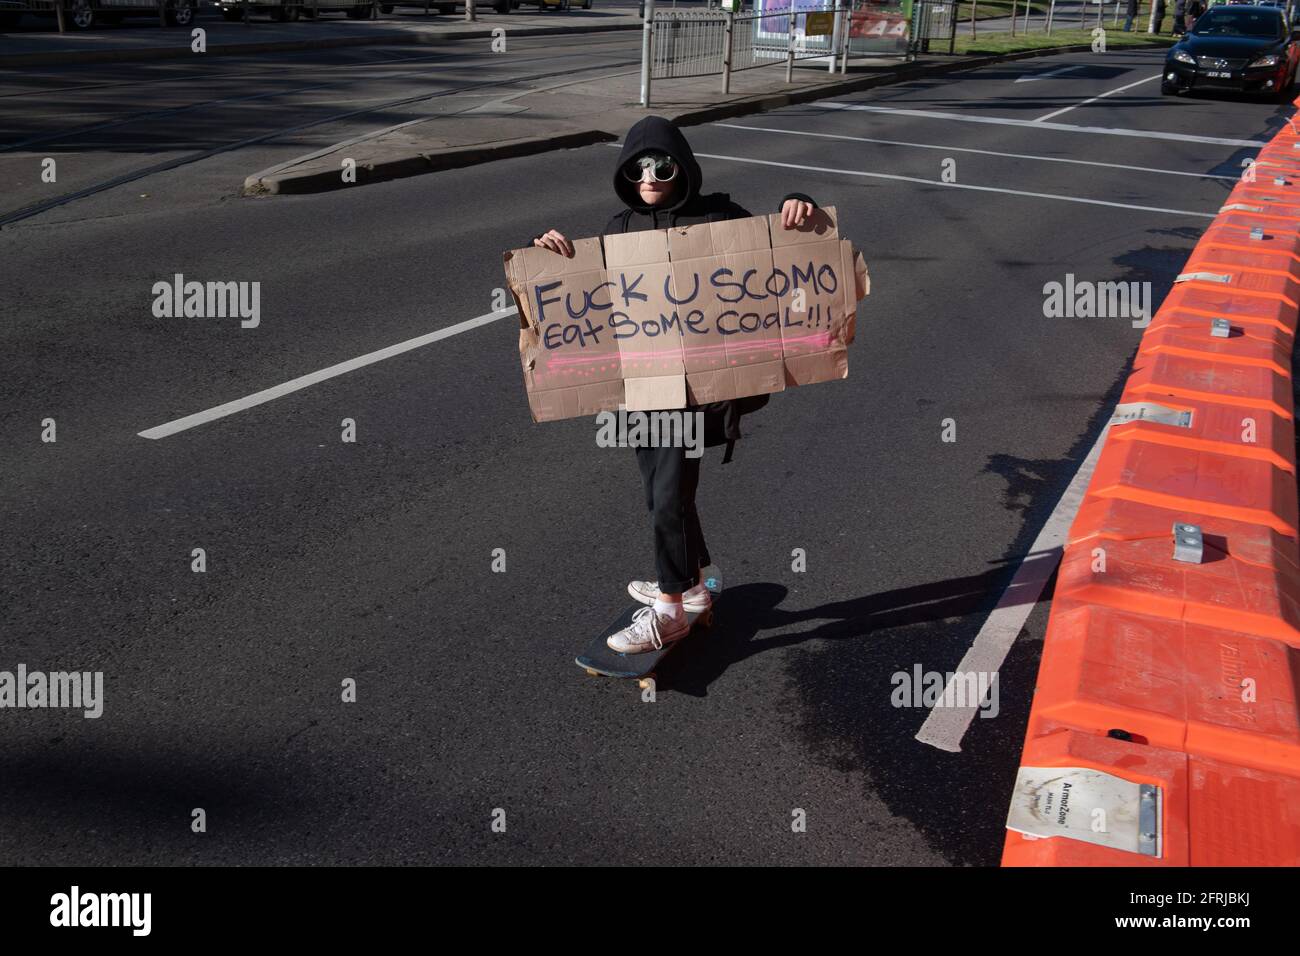 Melbourne, Australia 21 May 2021, A young protester on a skate board during a rally that brought 1000s of school students and supporters to the streets  of Melbourne for the 'Schools Strike 4 Climate' protests that called on governments around the world to take action on Climate change. Credit: Michael Currie/Alamy Live News Stock Photo